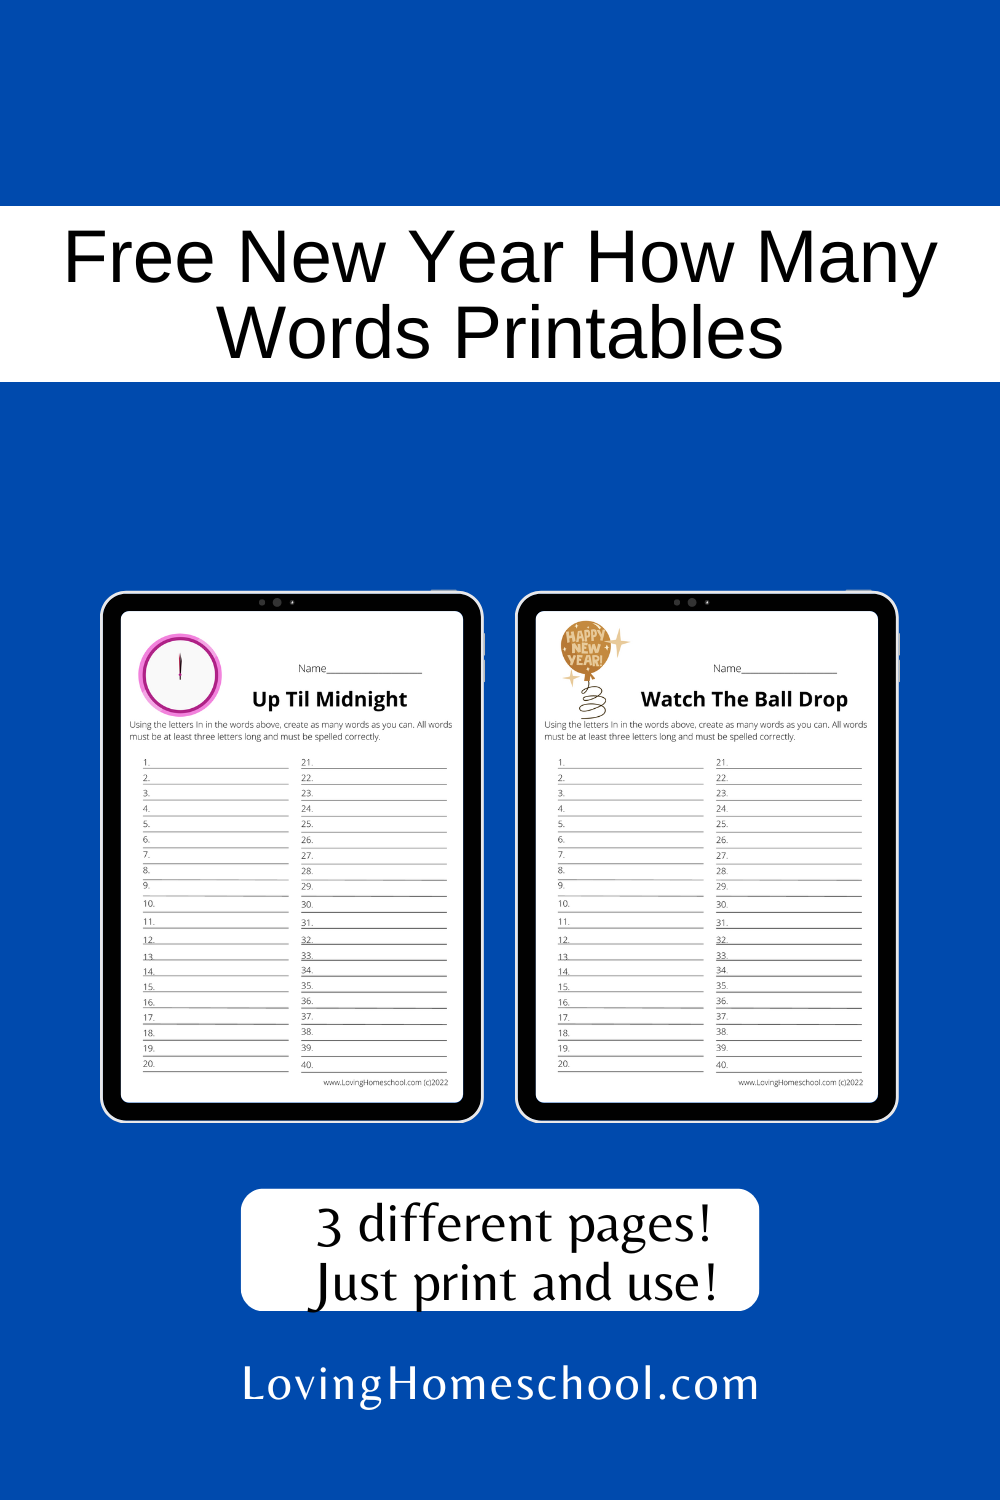 Free New Year How Many Words Printables Pinterest Pin